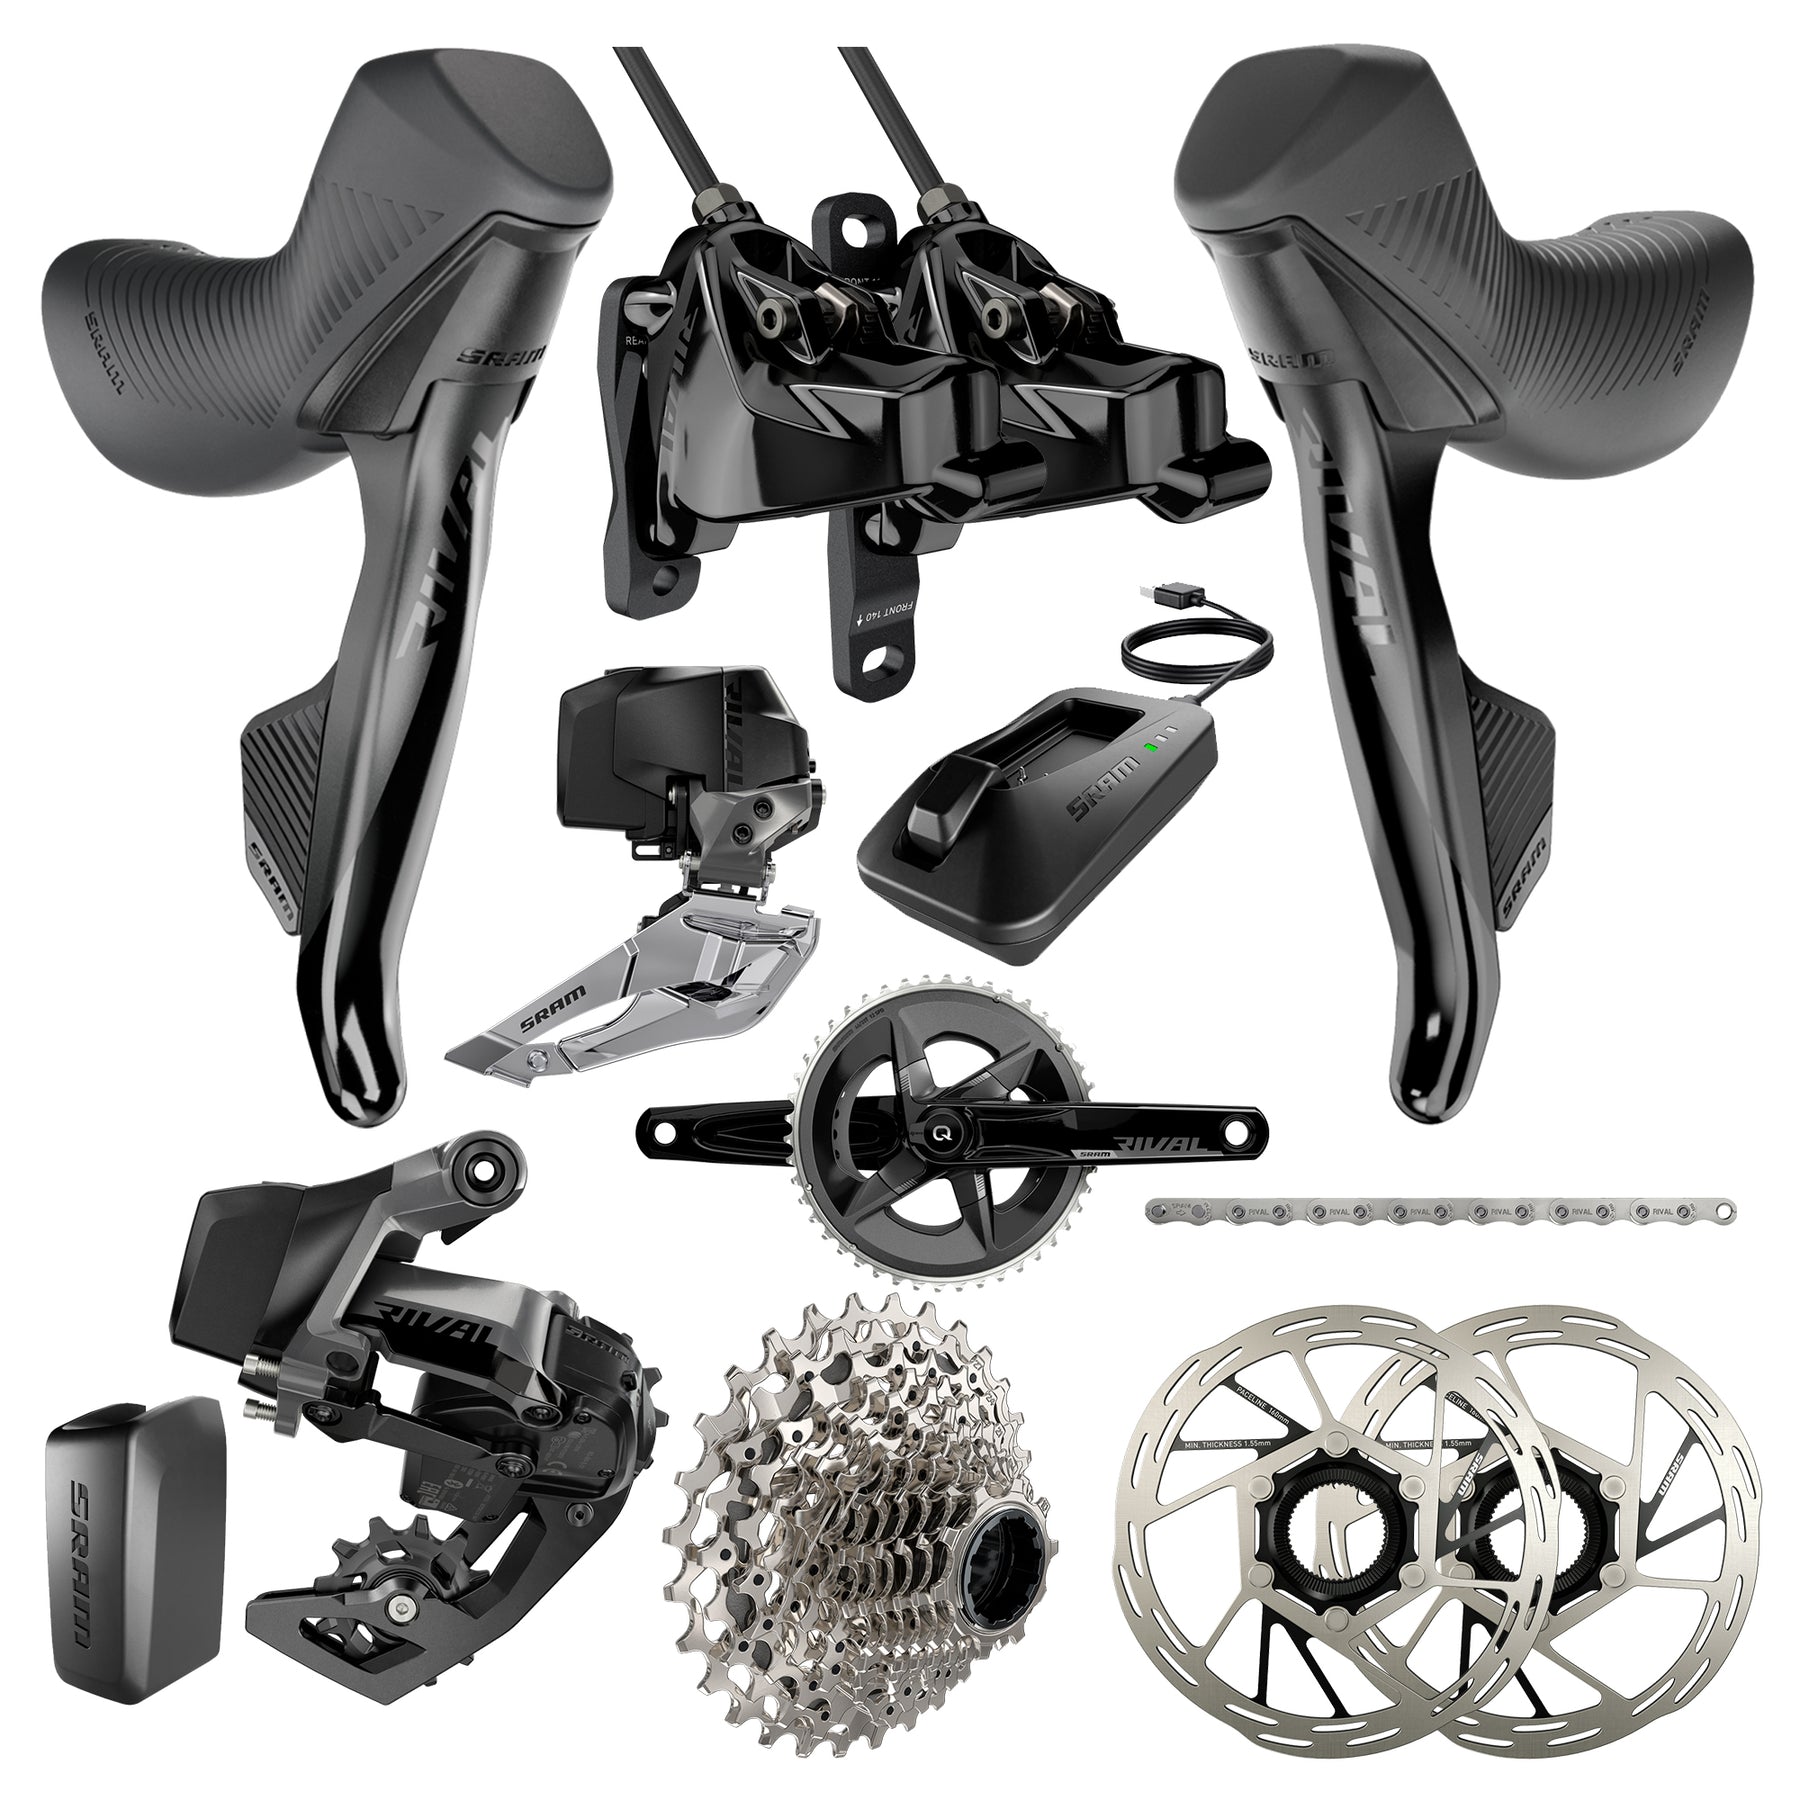 Sram Rival Axs Complete Groupset